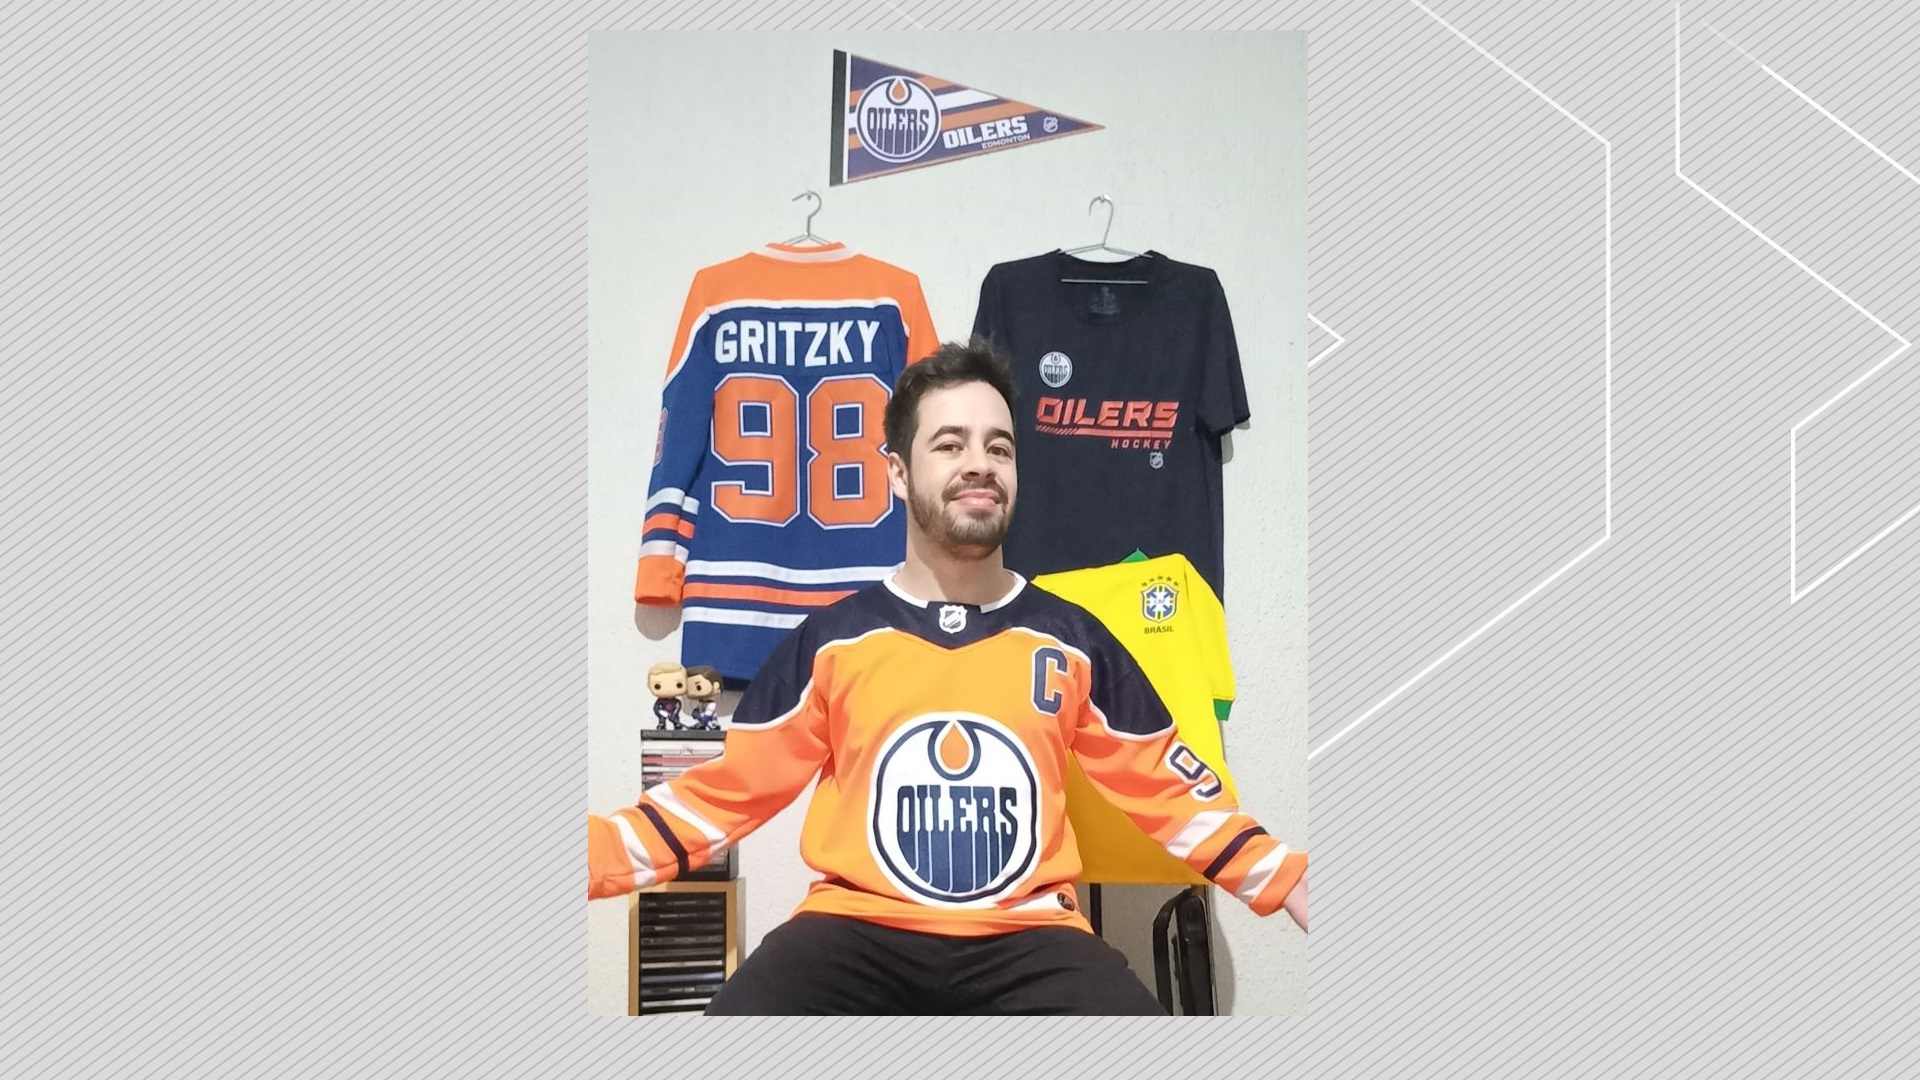 How a TV show led to a Brazilian man’s love of the Edmonton Oilers